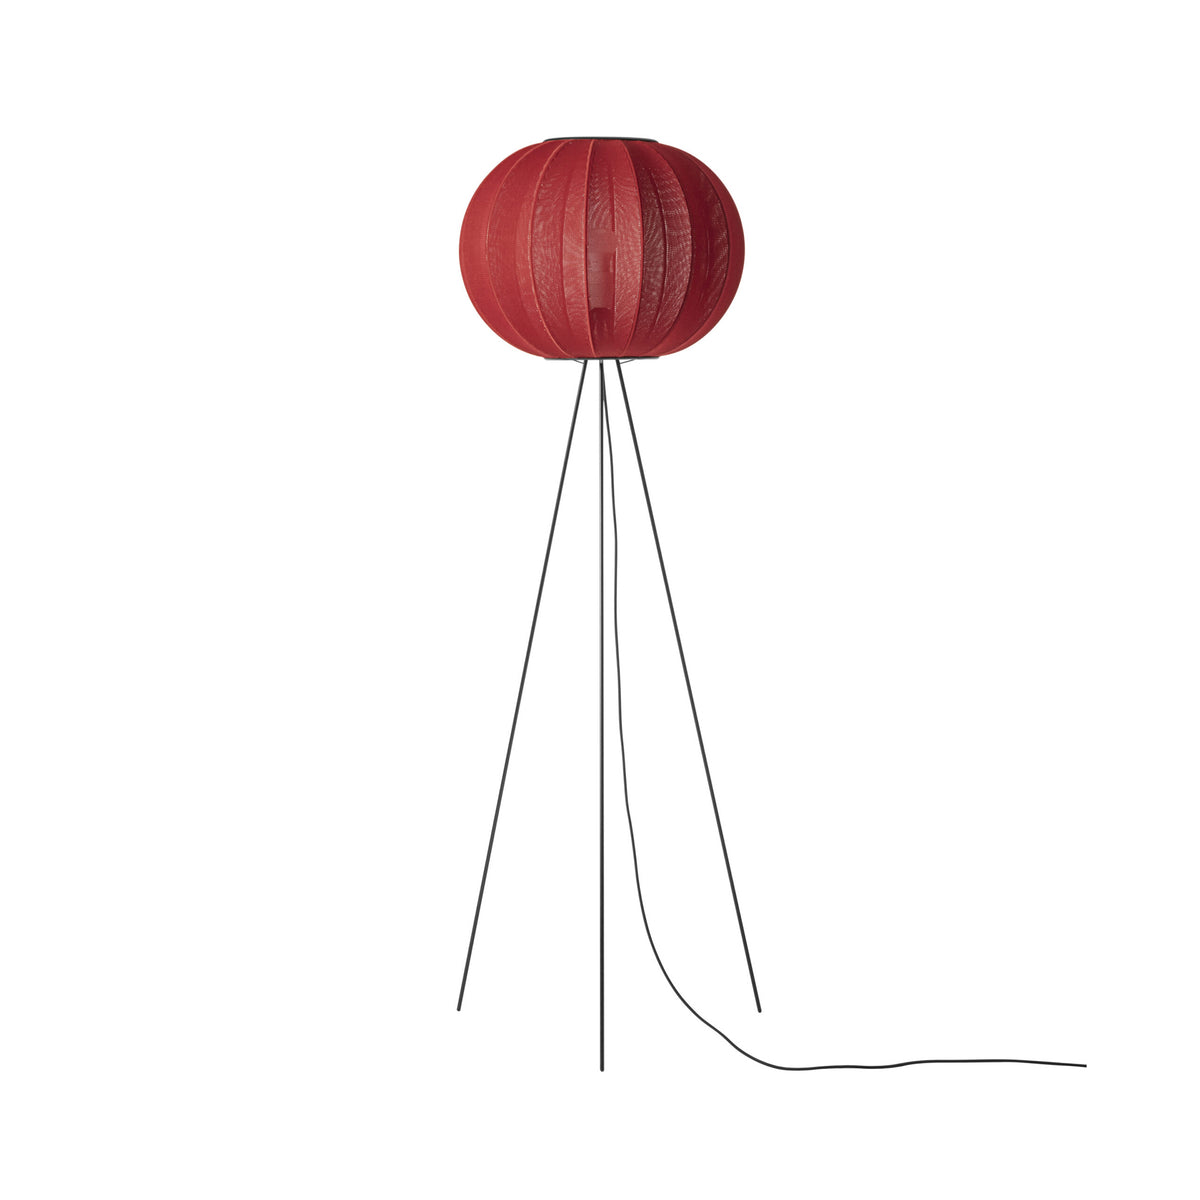 Made by Hand, Knit-Wit High Floor Lamp 45, Maple Red, Floor,